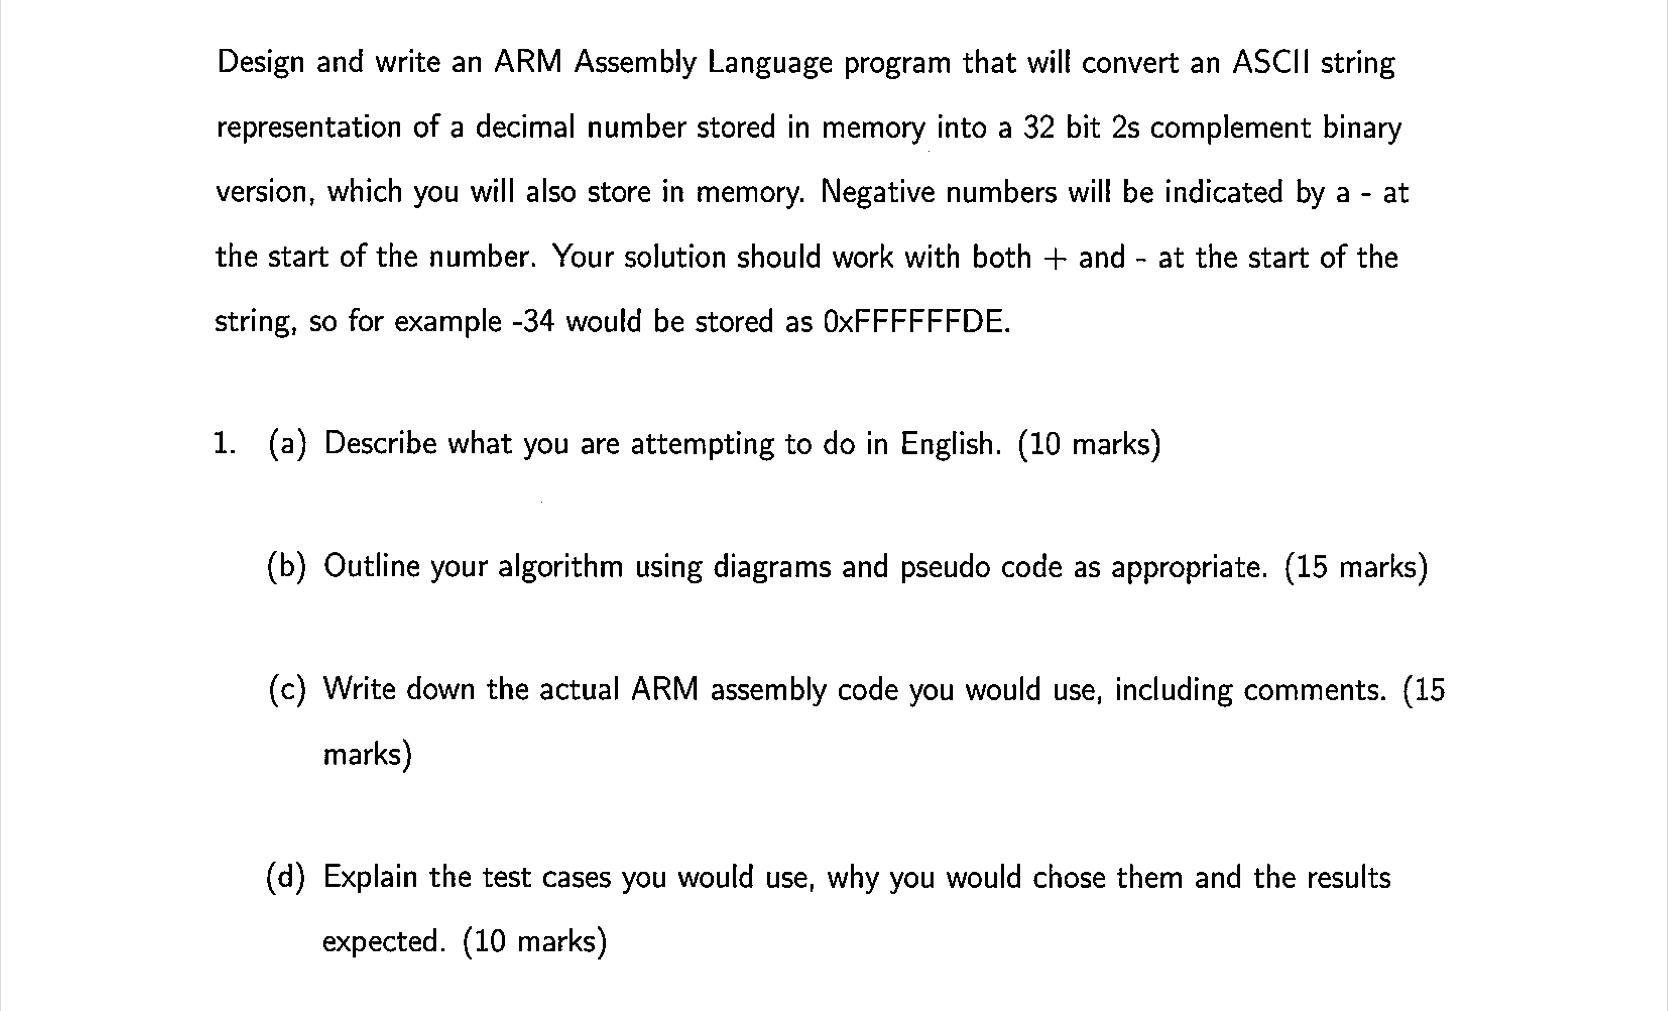 Design and write an ARM Assembly Language program that will convert an ASCII string representation of a